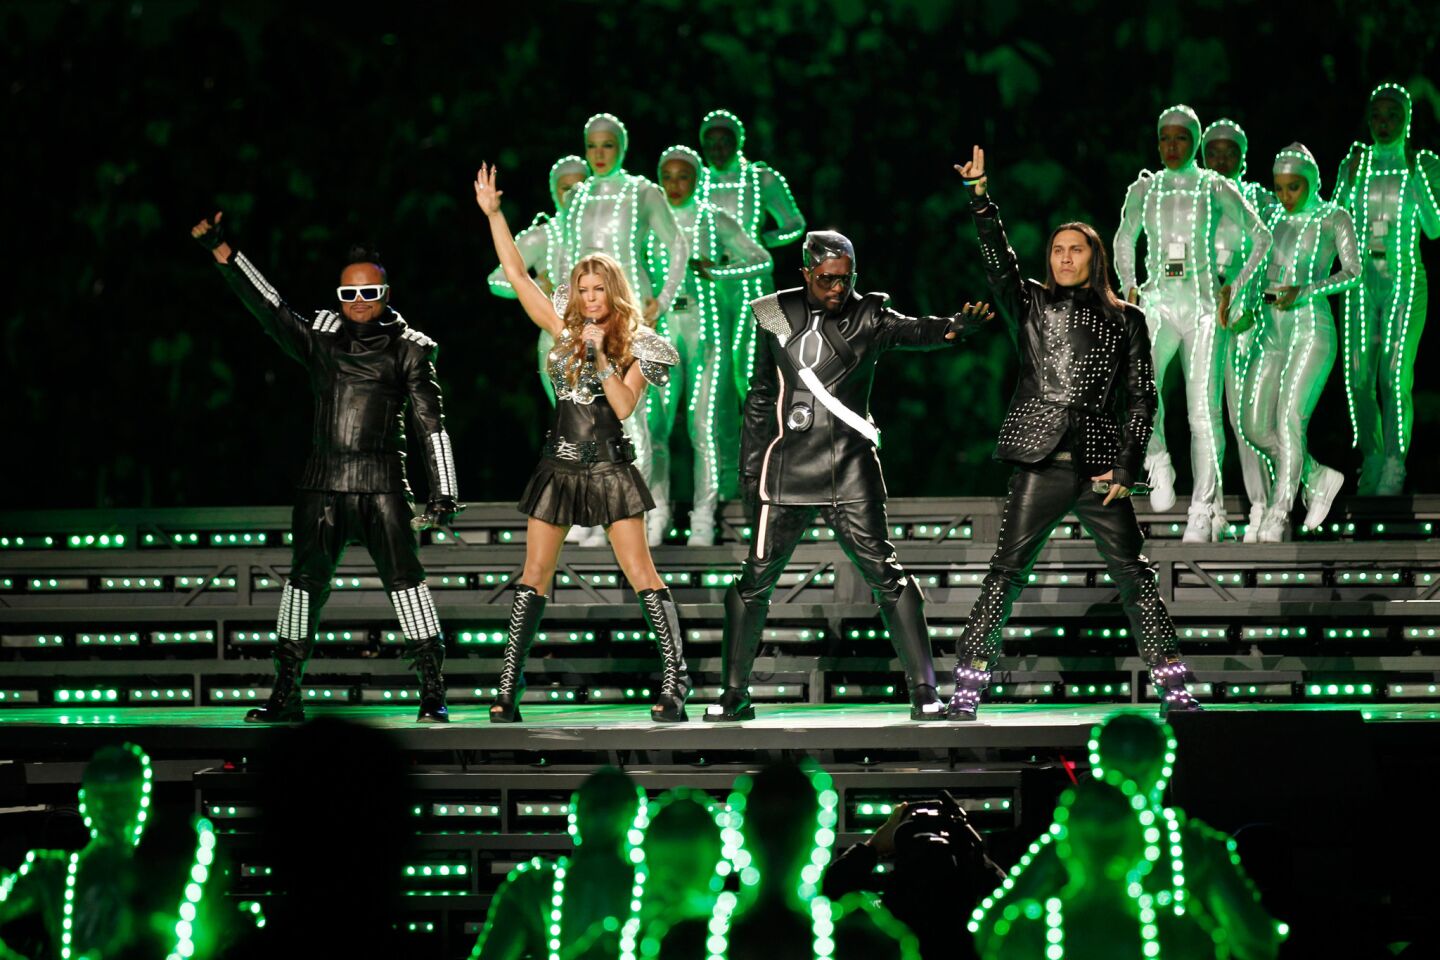 The Black Eyed Peas largely stayed still during the performance, letting the backup dancers in "Tron"-like get-ups provide the eye candy, yet they still infused their hits with energy. The result was a success -- their tuneful chants seemed built for the stadium.